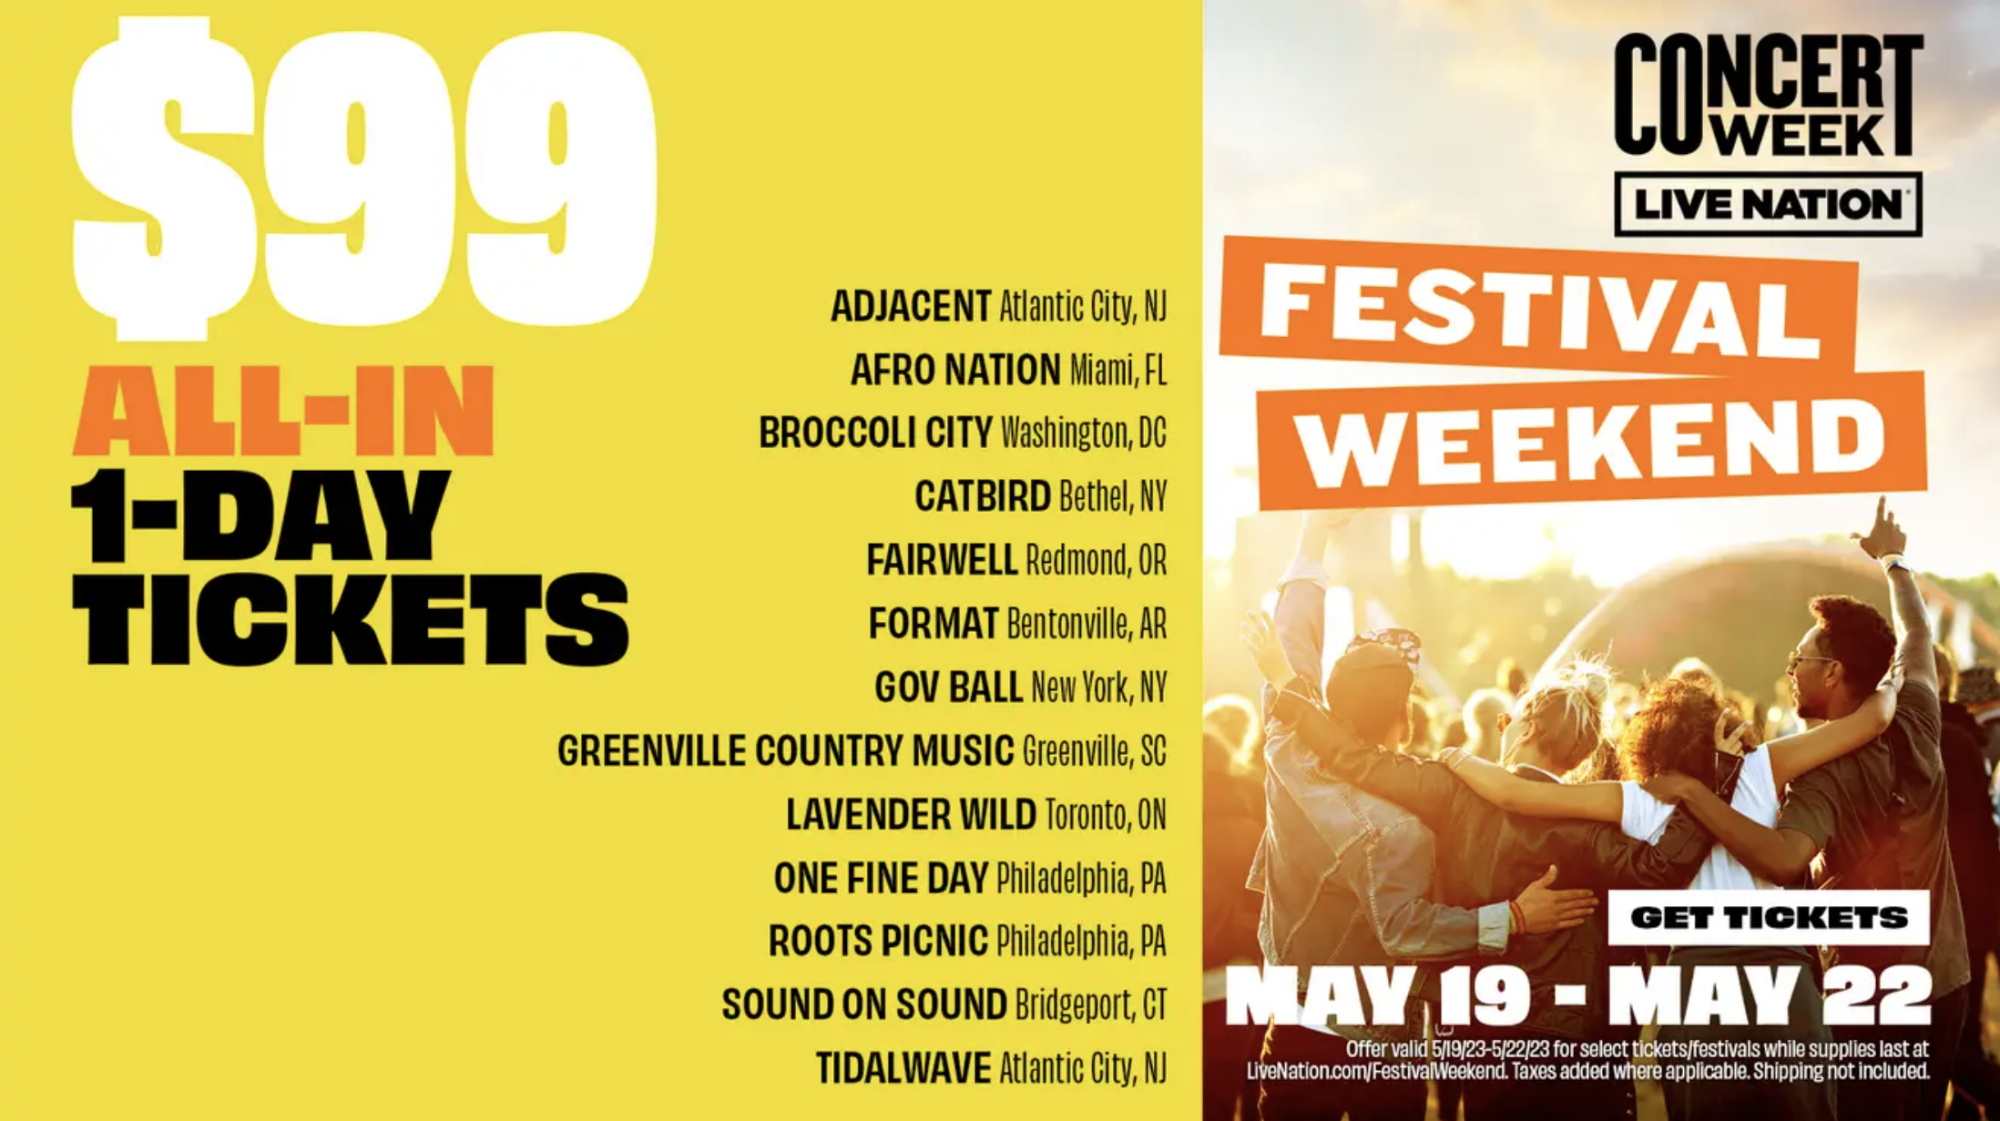 Live Nation Concert Week festival lineup graphic and festival goers in corner